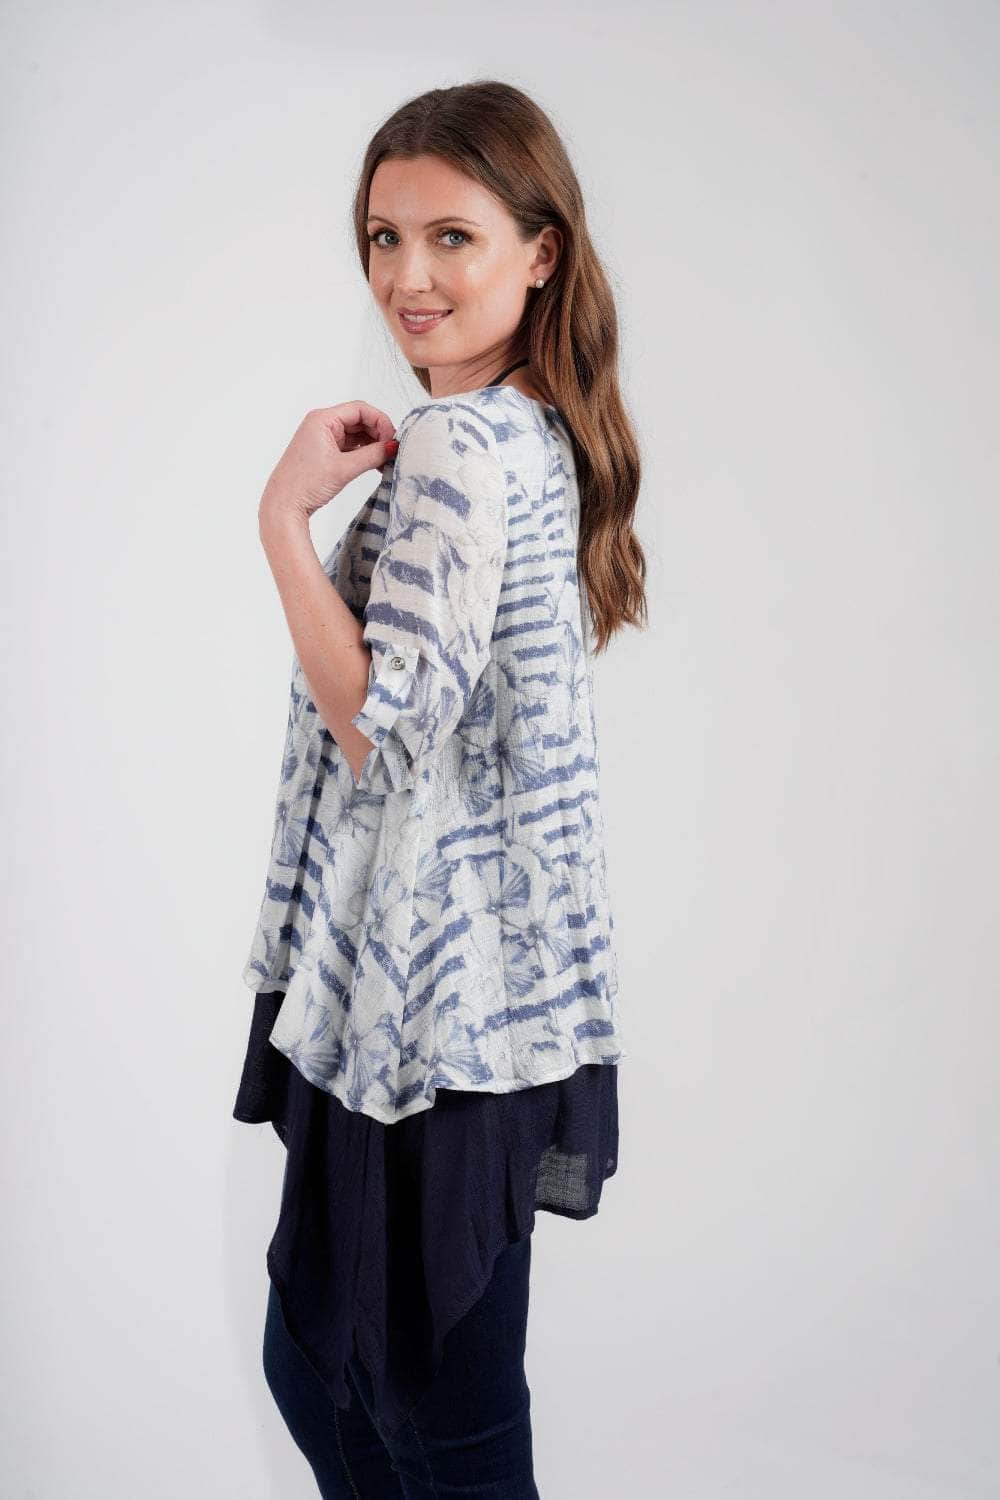 Saloos Top Floral Linen-Look Layered Top with Necklace